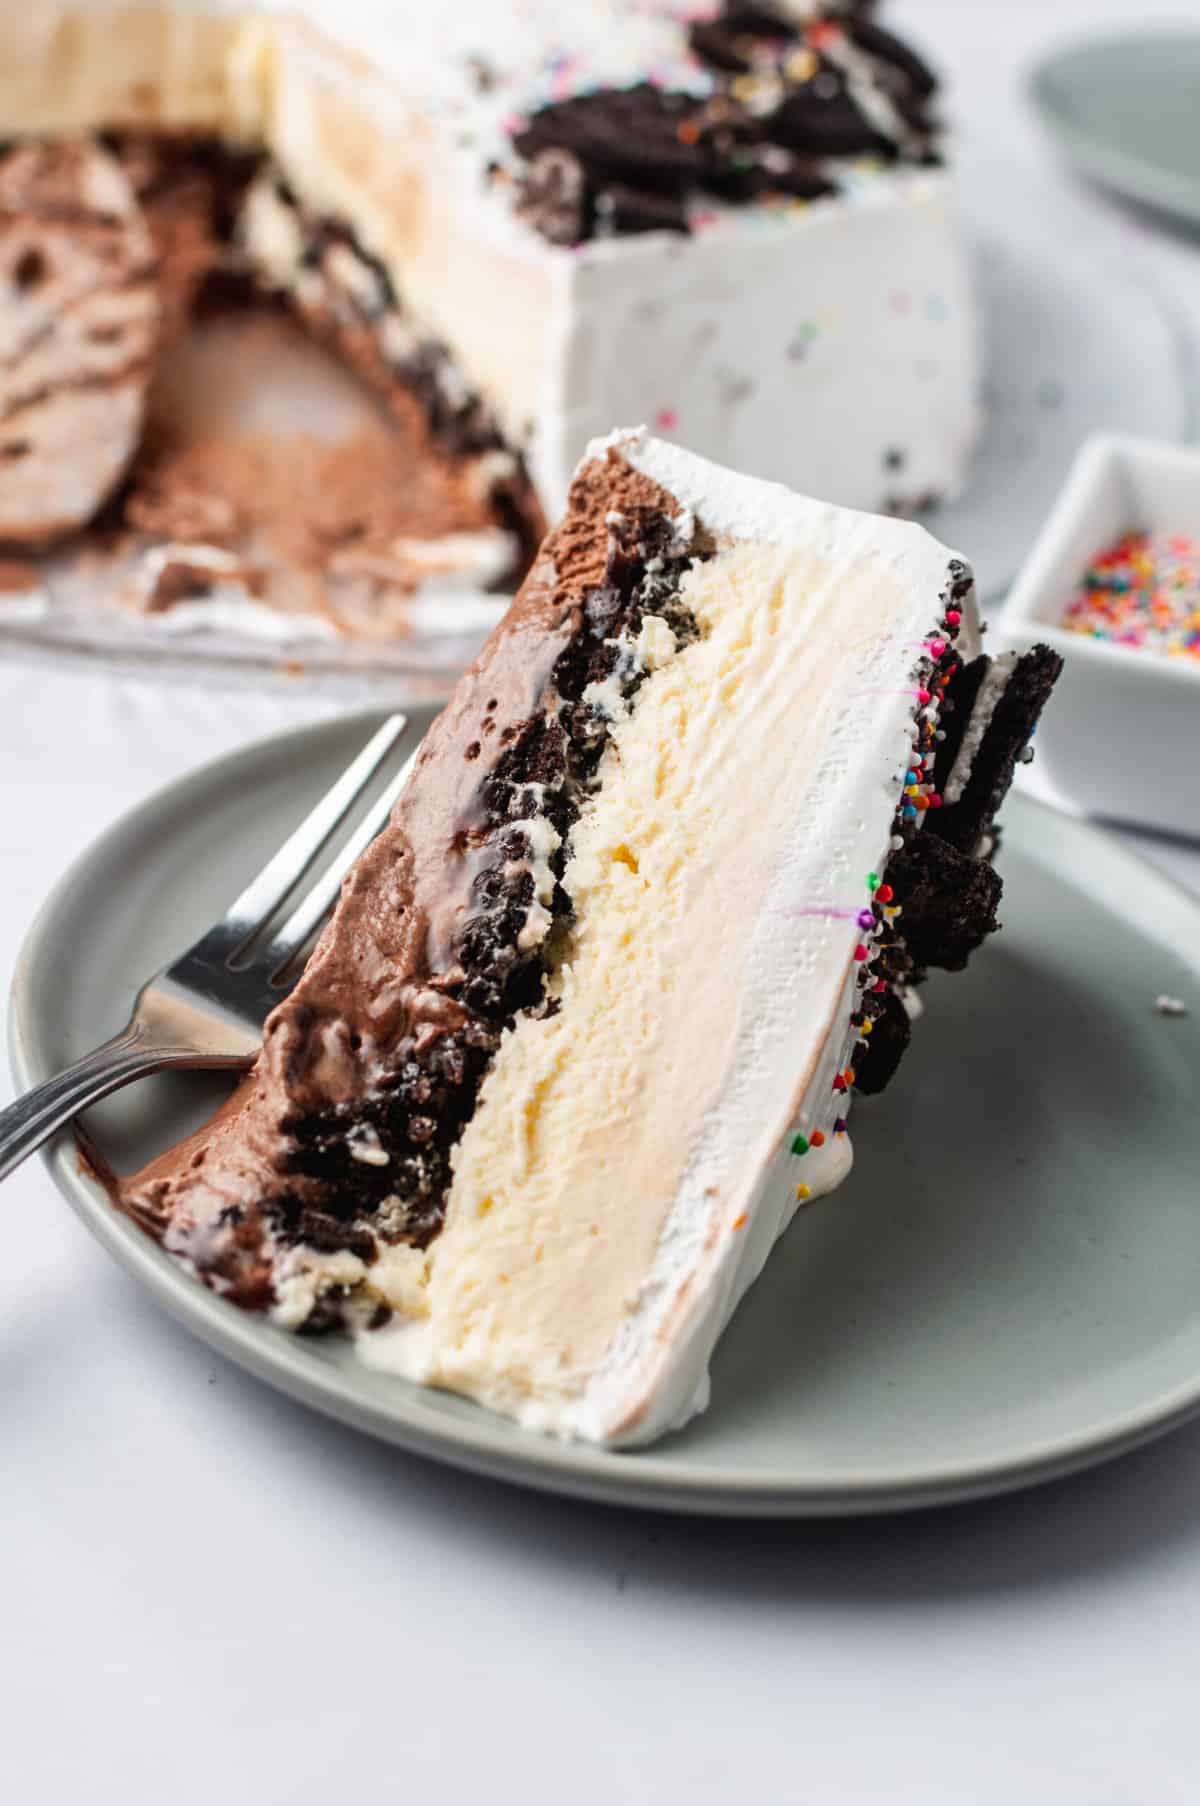 slice of Copycat Dairy Queen Ice Cream Cake on its side served on a grey round plate with a silver fork